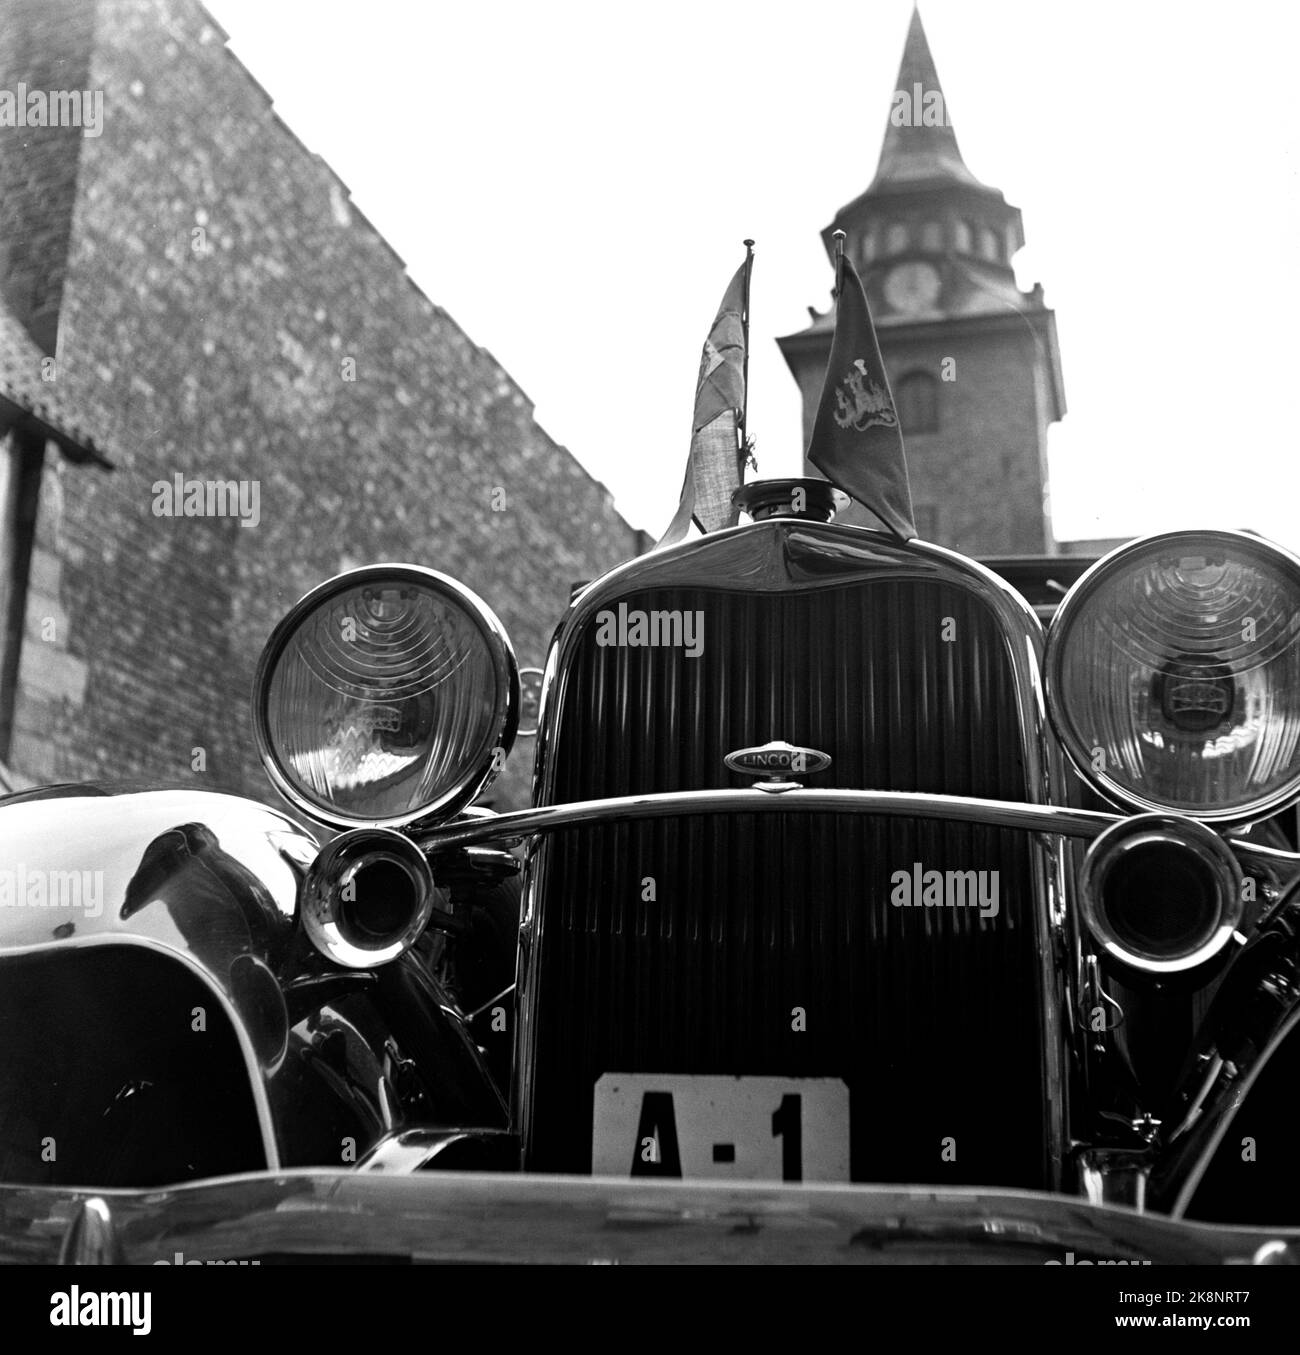 Oslo 1952. King Gustaf Adolf and Queen Louise from Sweden are officially visited in Norway. The royal car A1 photographed outside Akershus castle during the tour. Photo: Sverre A. Børretzen / Current / NTB Stock Photo